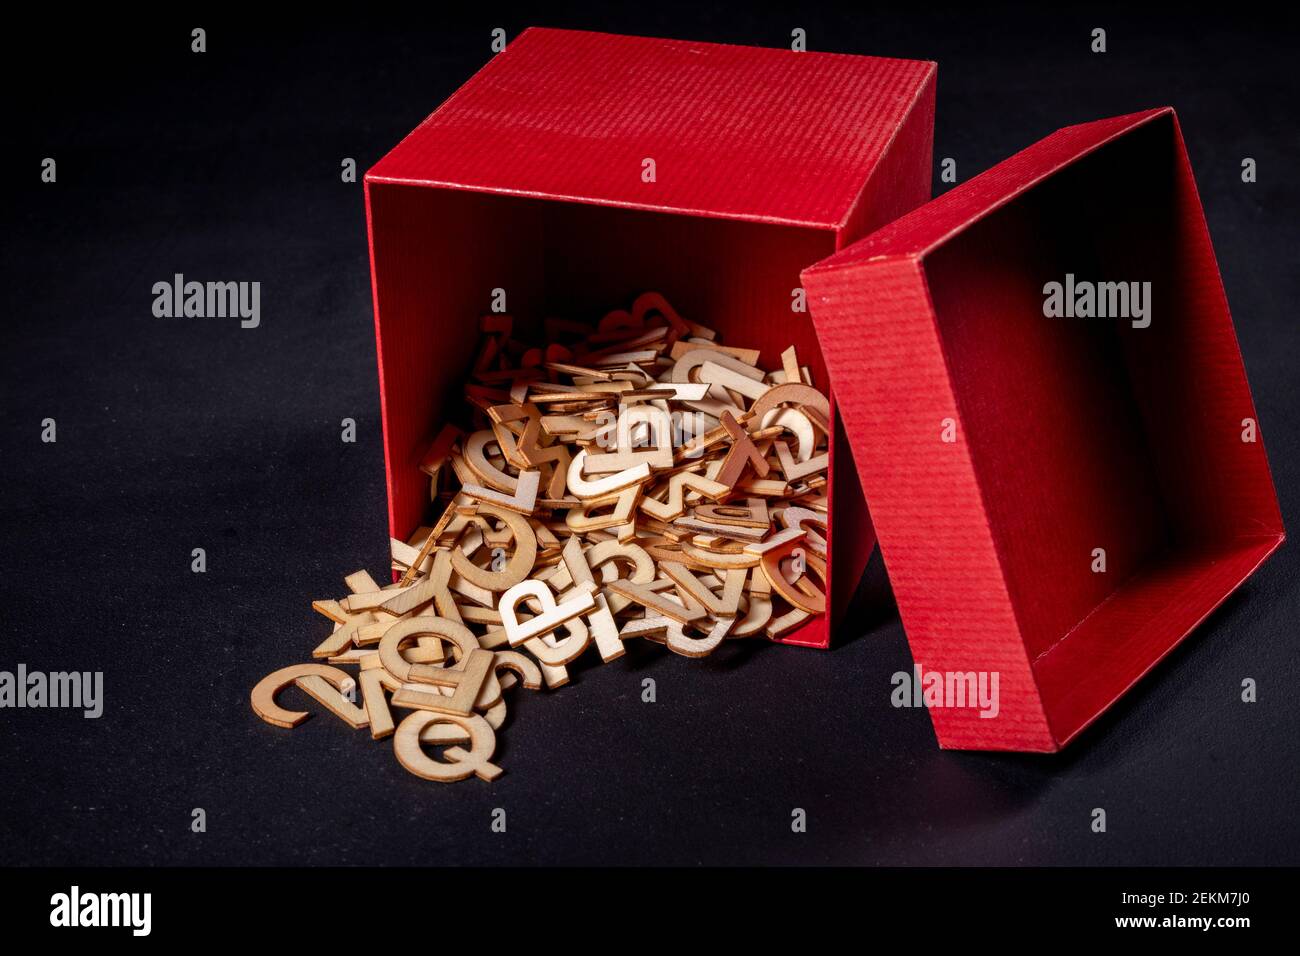 Small wooden letters spilling out of a red box. Outlines of letters with a wood texture used to form words. Dark background. Stock Photo